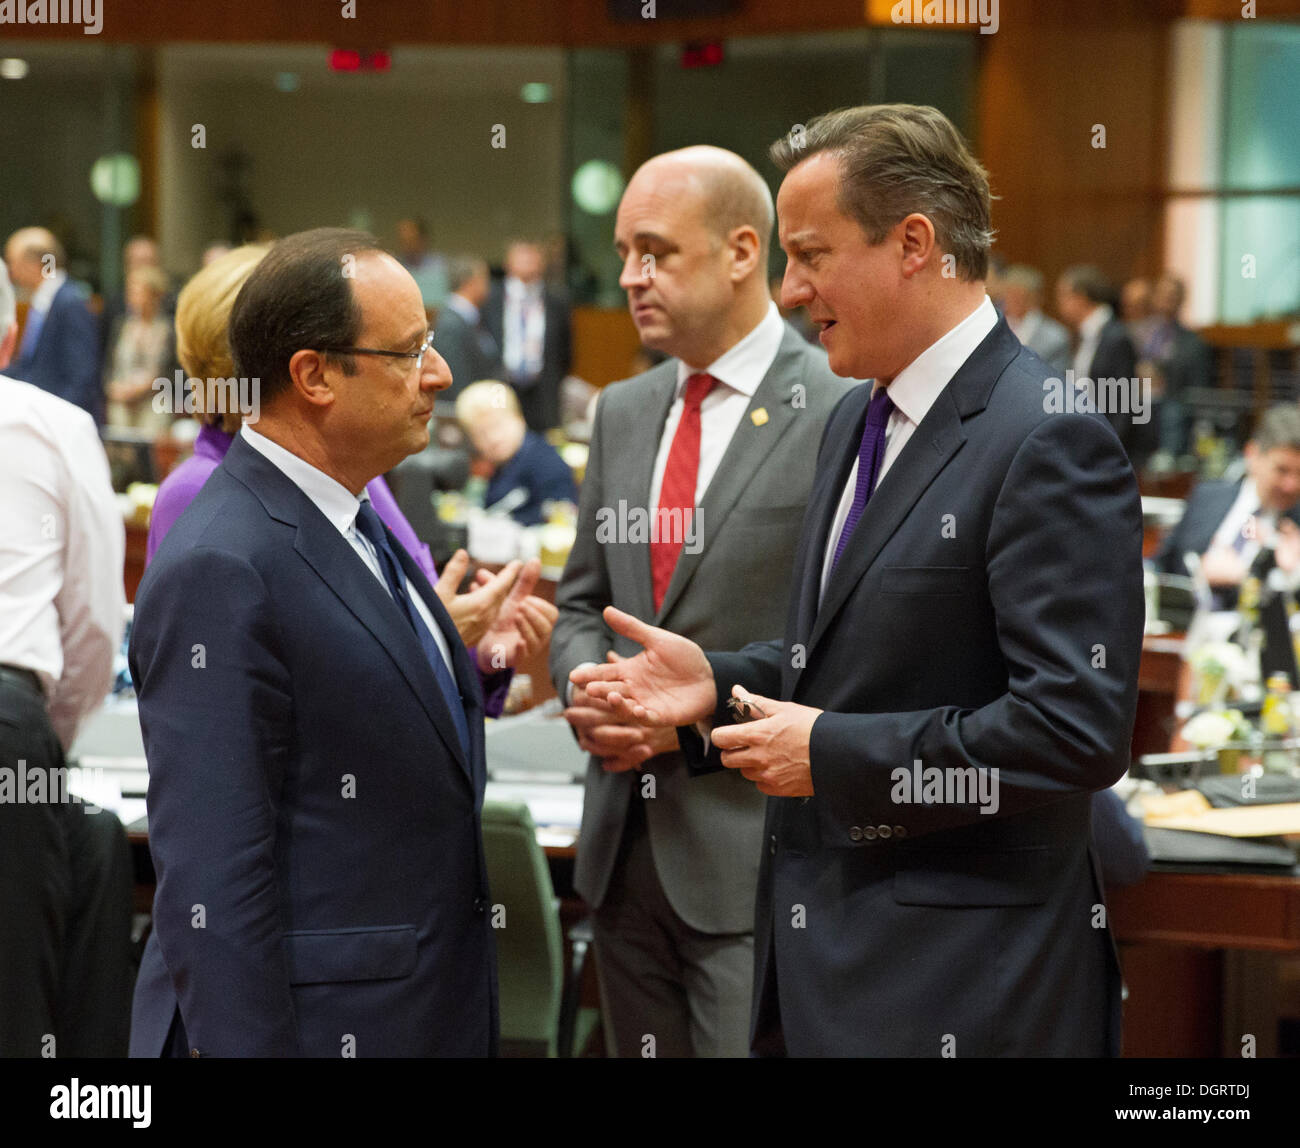 Brussels, Belgium. 25th Oct, 2013. Heads of State at the European Council meeting, Brussels. Pictured at the European Council meeting were, left to right, Francois Hollande, President, France. David Cameron, Prime Minister, United Kingdom Stock Photo